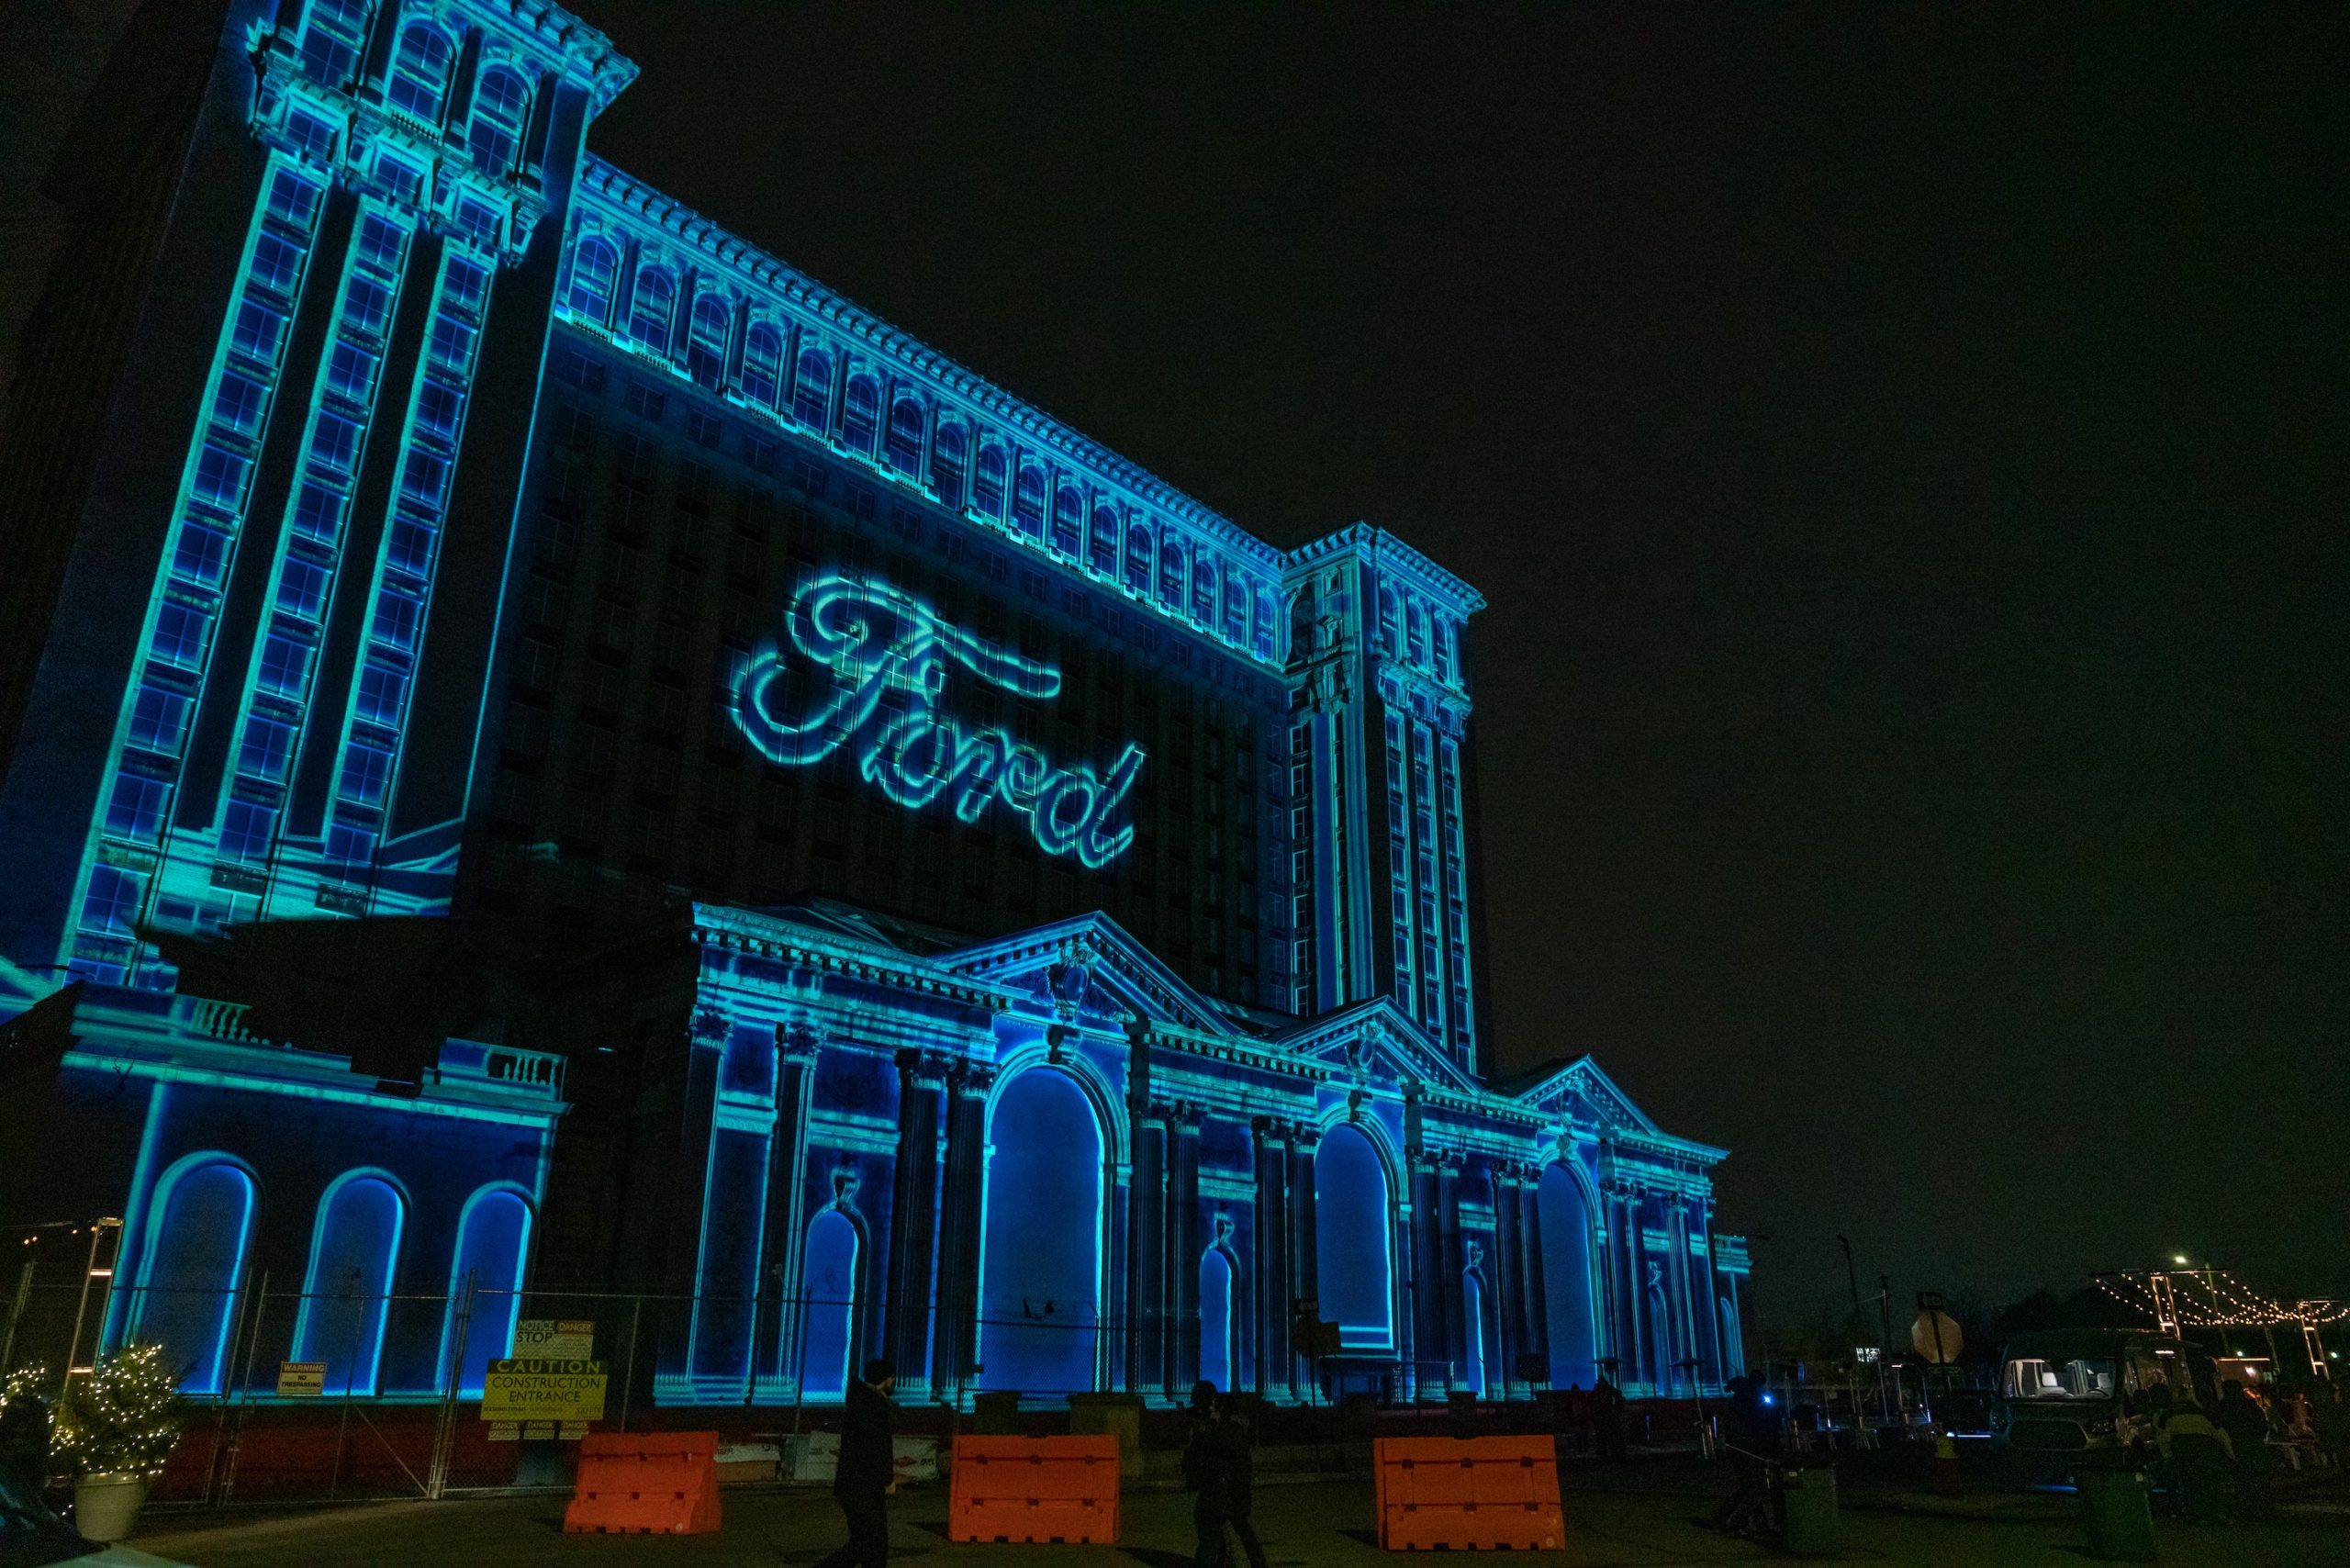 Michigan Central Station illuminated at night with Ford logo